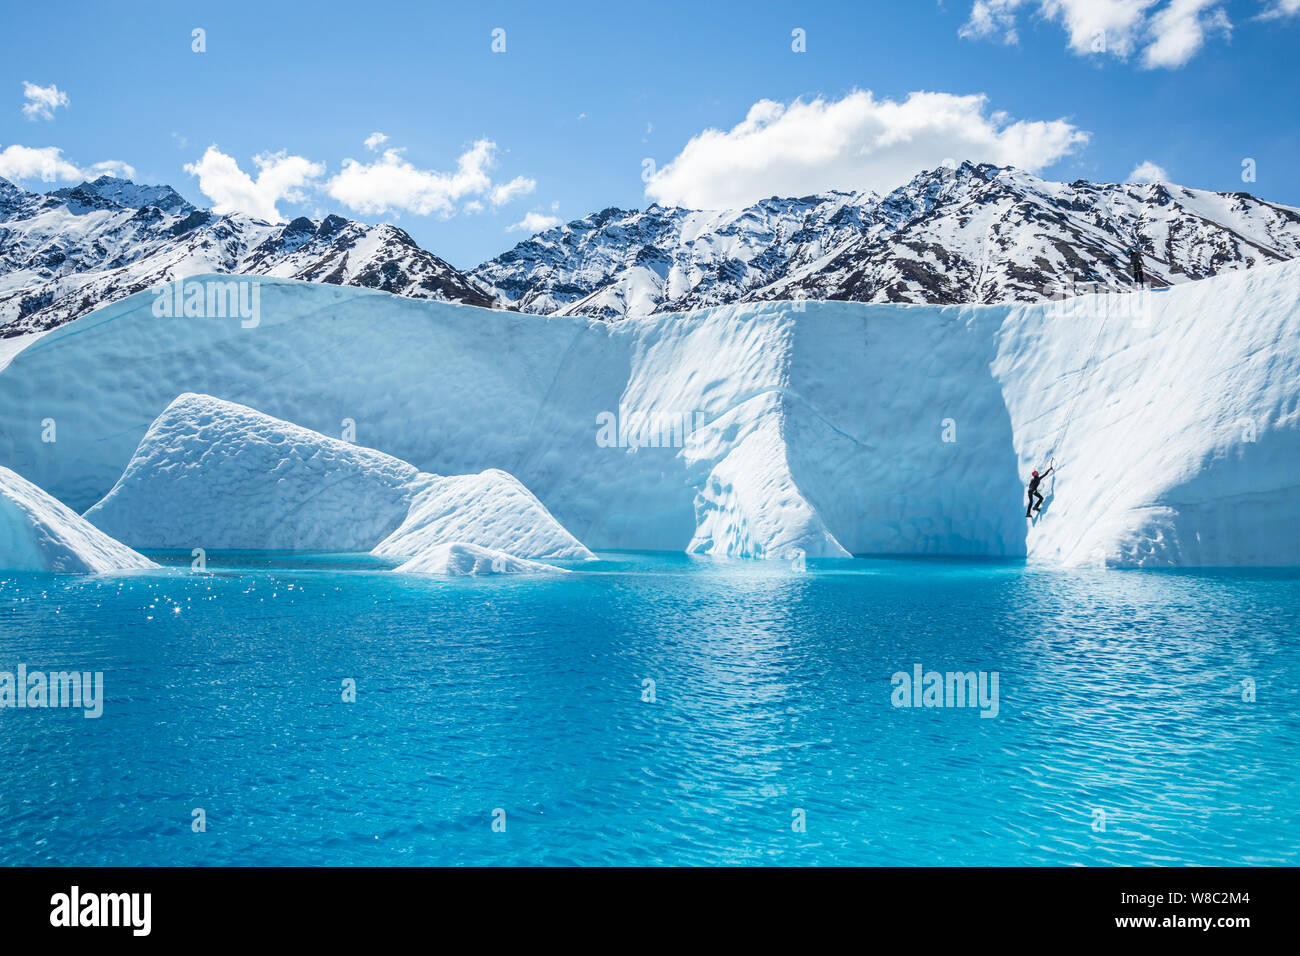 Massive blue lake on the Matanuska Glacier with an ice climber ascending up from just above the blue water. Stock Photo